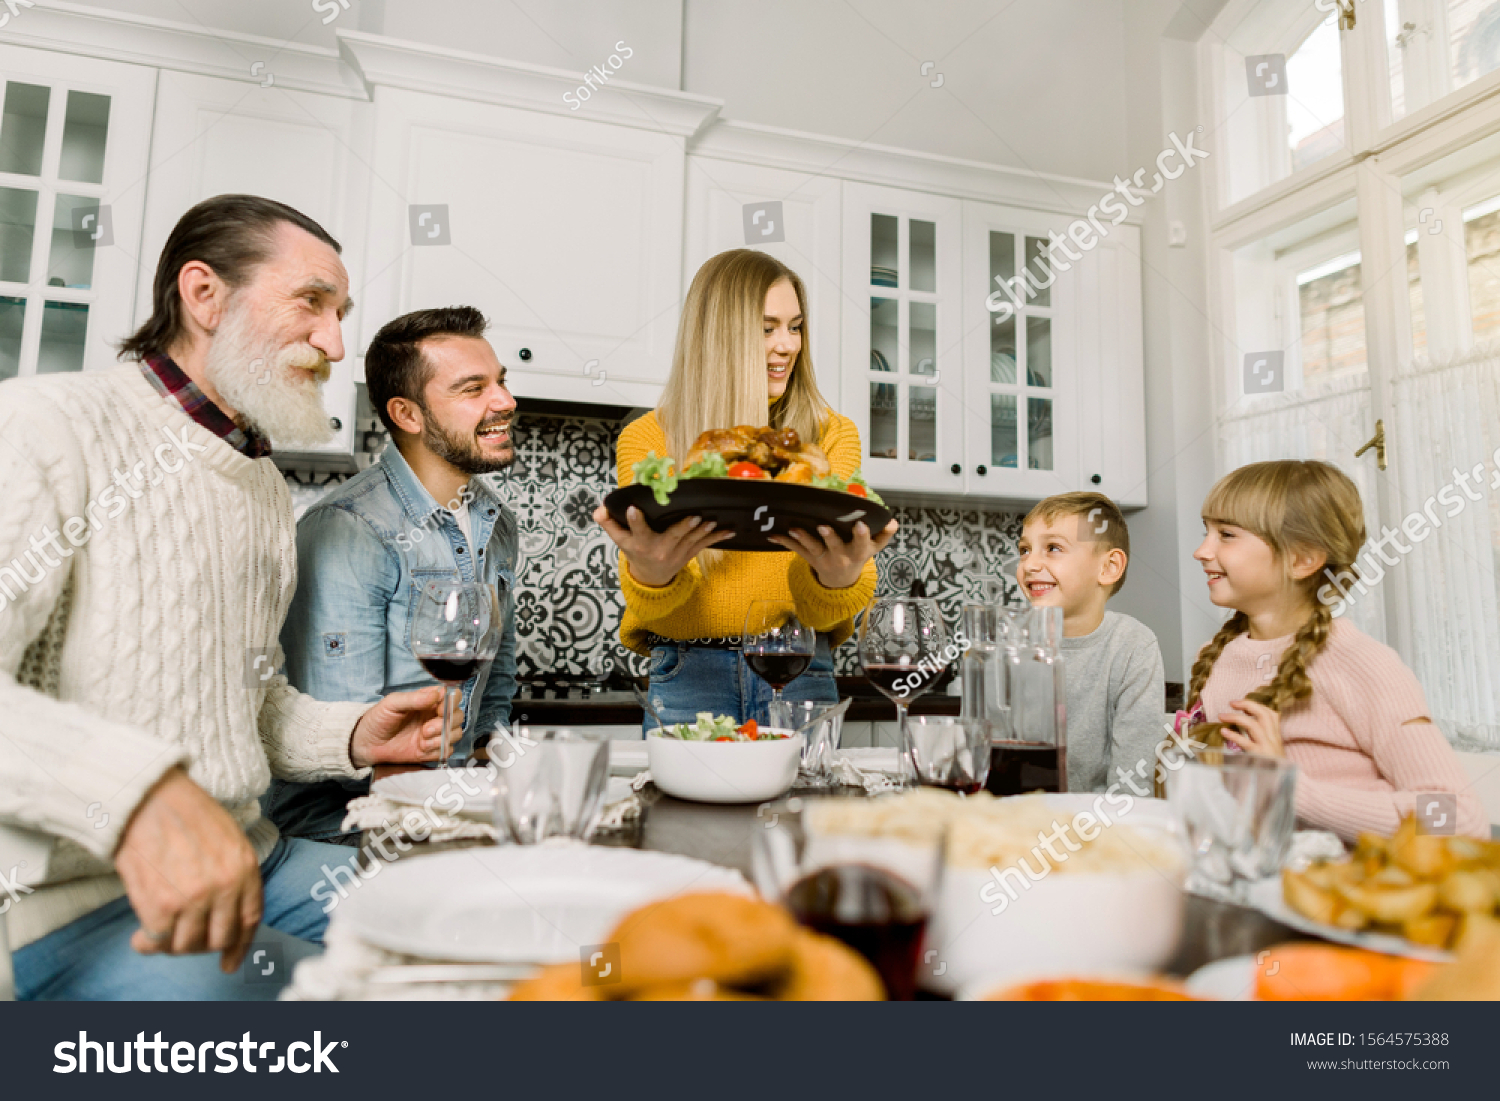 The family sits down for dinner on Thanksgiving. Young woman serves a festive turkey with a salad, grandfather, father and children sit and look at the tasty food and smile #1564575388